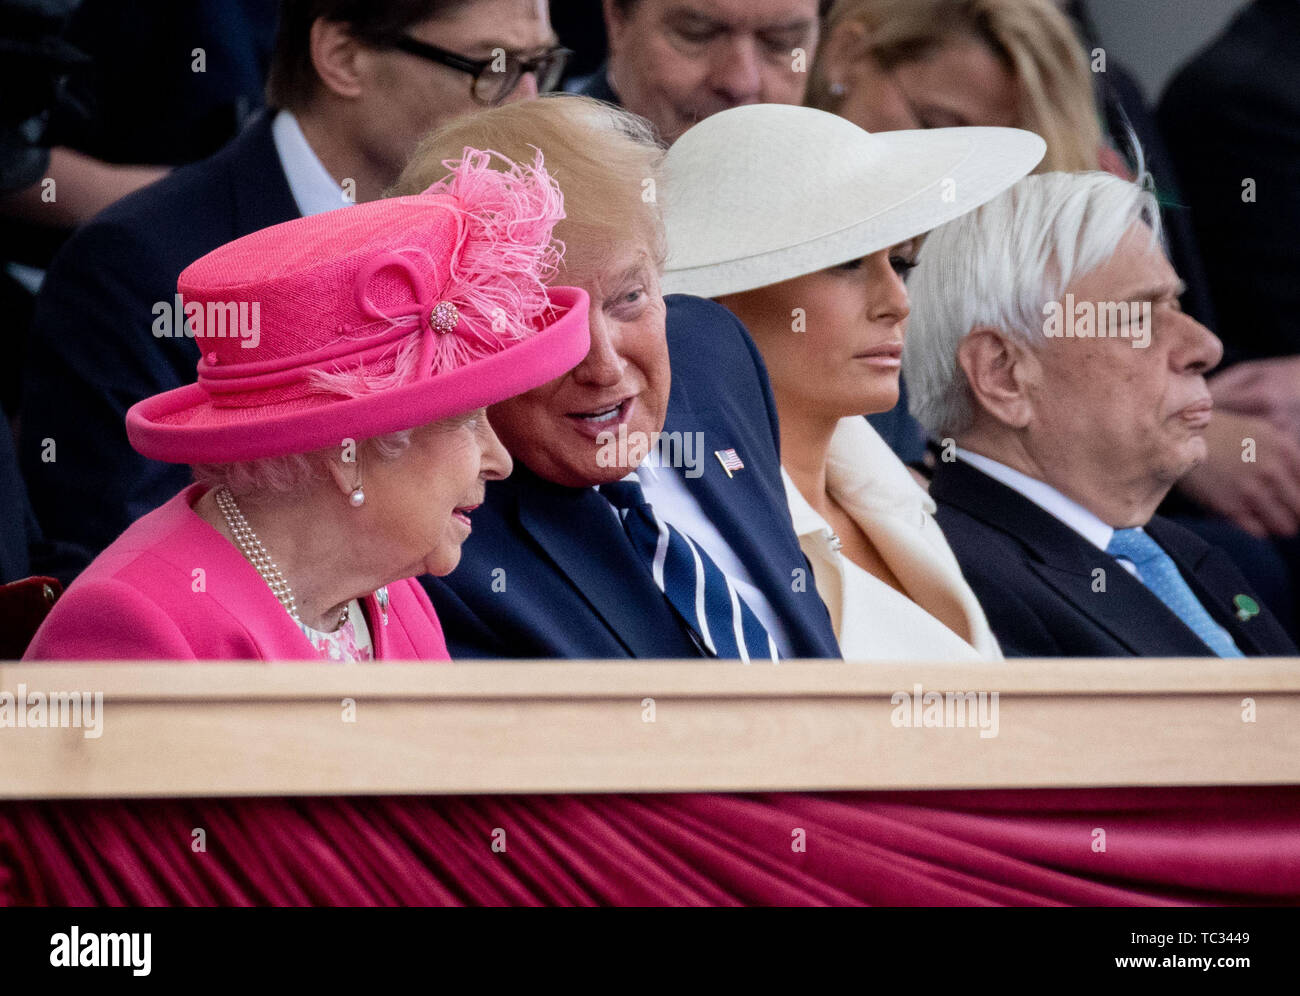 Portsmouth, UK. 05th June, 2019. Queen Elizabeth II of Great Britain, (l-r)  Donald Trump, President of the United States, his wife Melania, First Lady  of the United States, Prokopis Pavlopoulos, President of